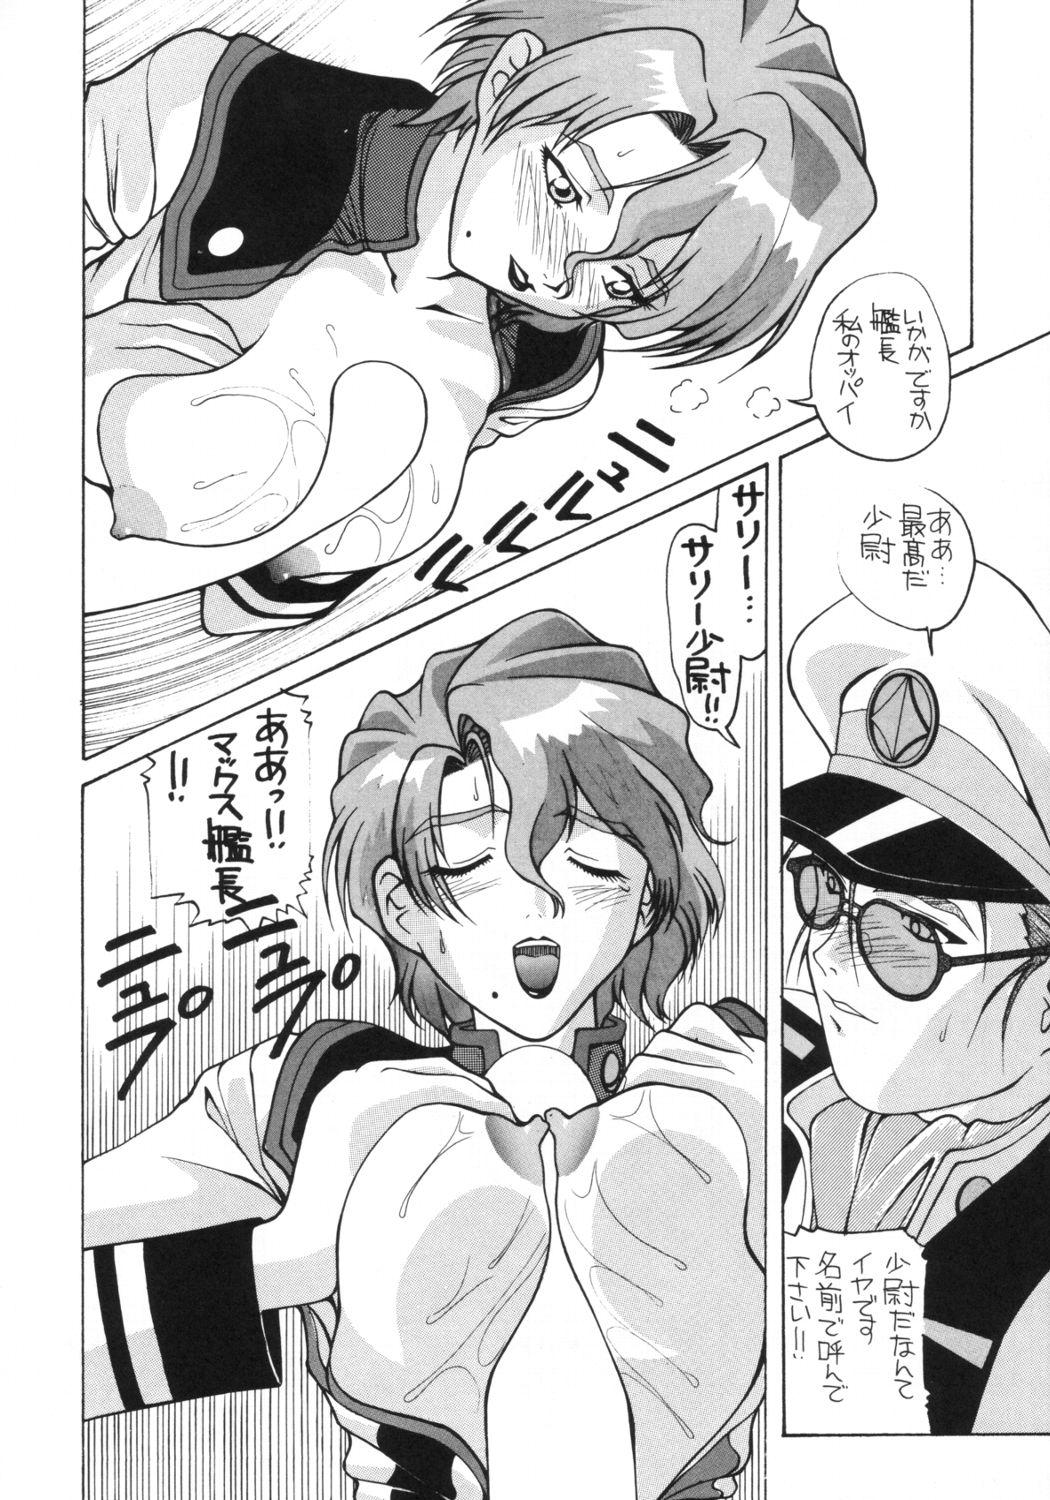 Gay Massage Aido 56789 Soushuuhen - Macross 7 Lord of lords ryu knight Brave express might gaine Dirty pair flash Mama is a 4th grader Spoon - Page 12